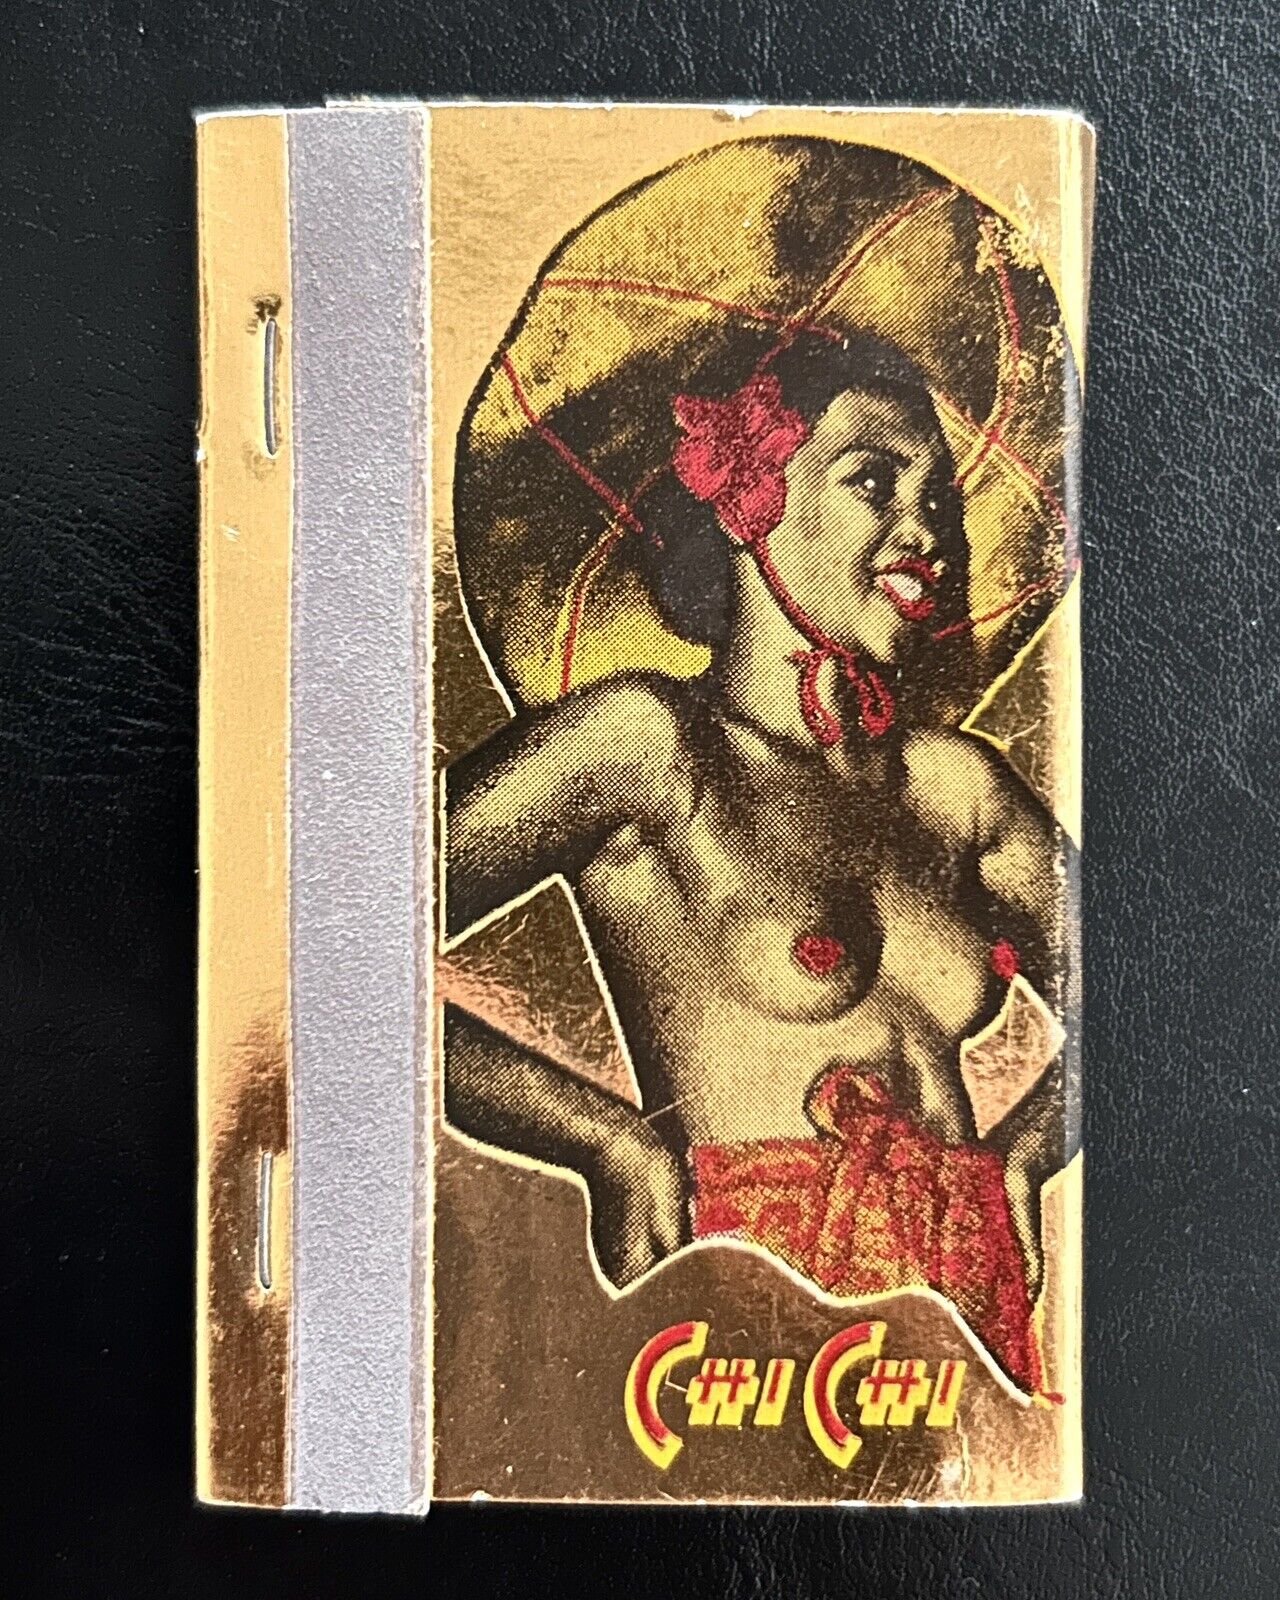 Vintage Unused Matchbook Glamorous Hot Spot CHI CHI STARLIGHT ROOM Palm Springs